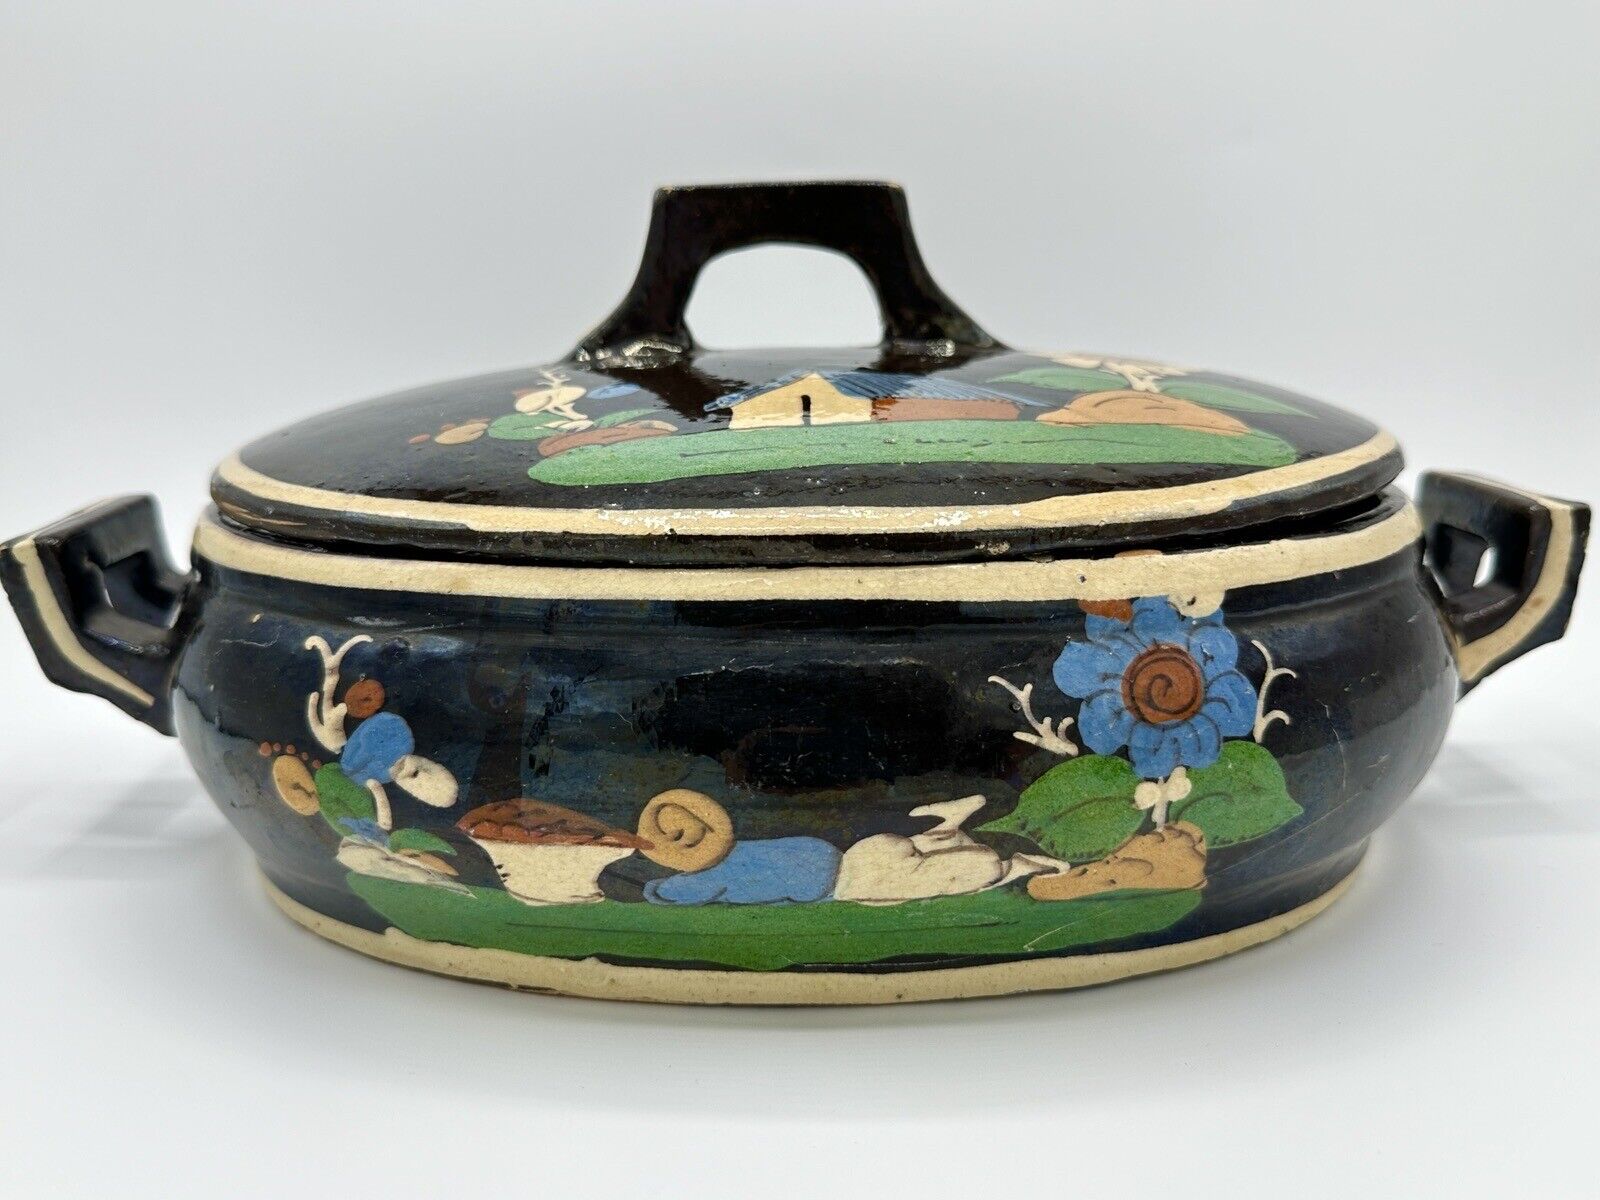 Vintage 1930s Black Mexican Tlaquepaque  Pottery Hand-Painted Casserole Marked